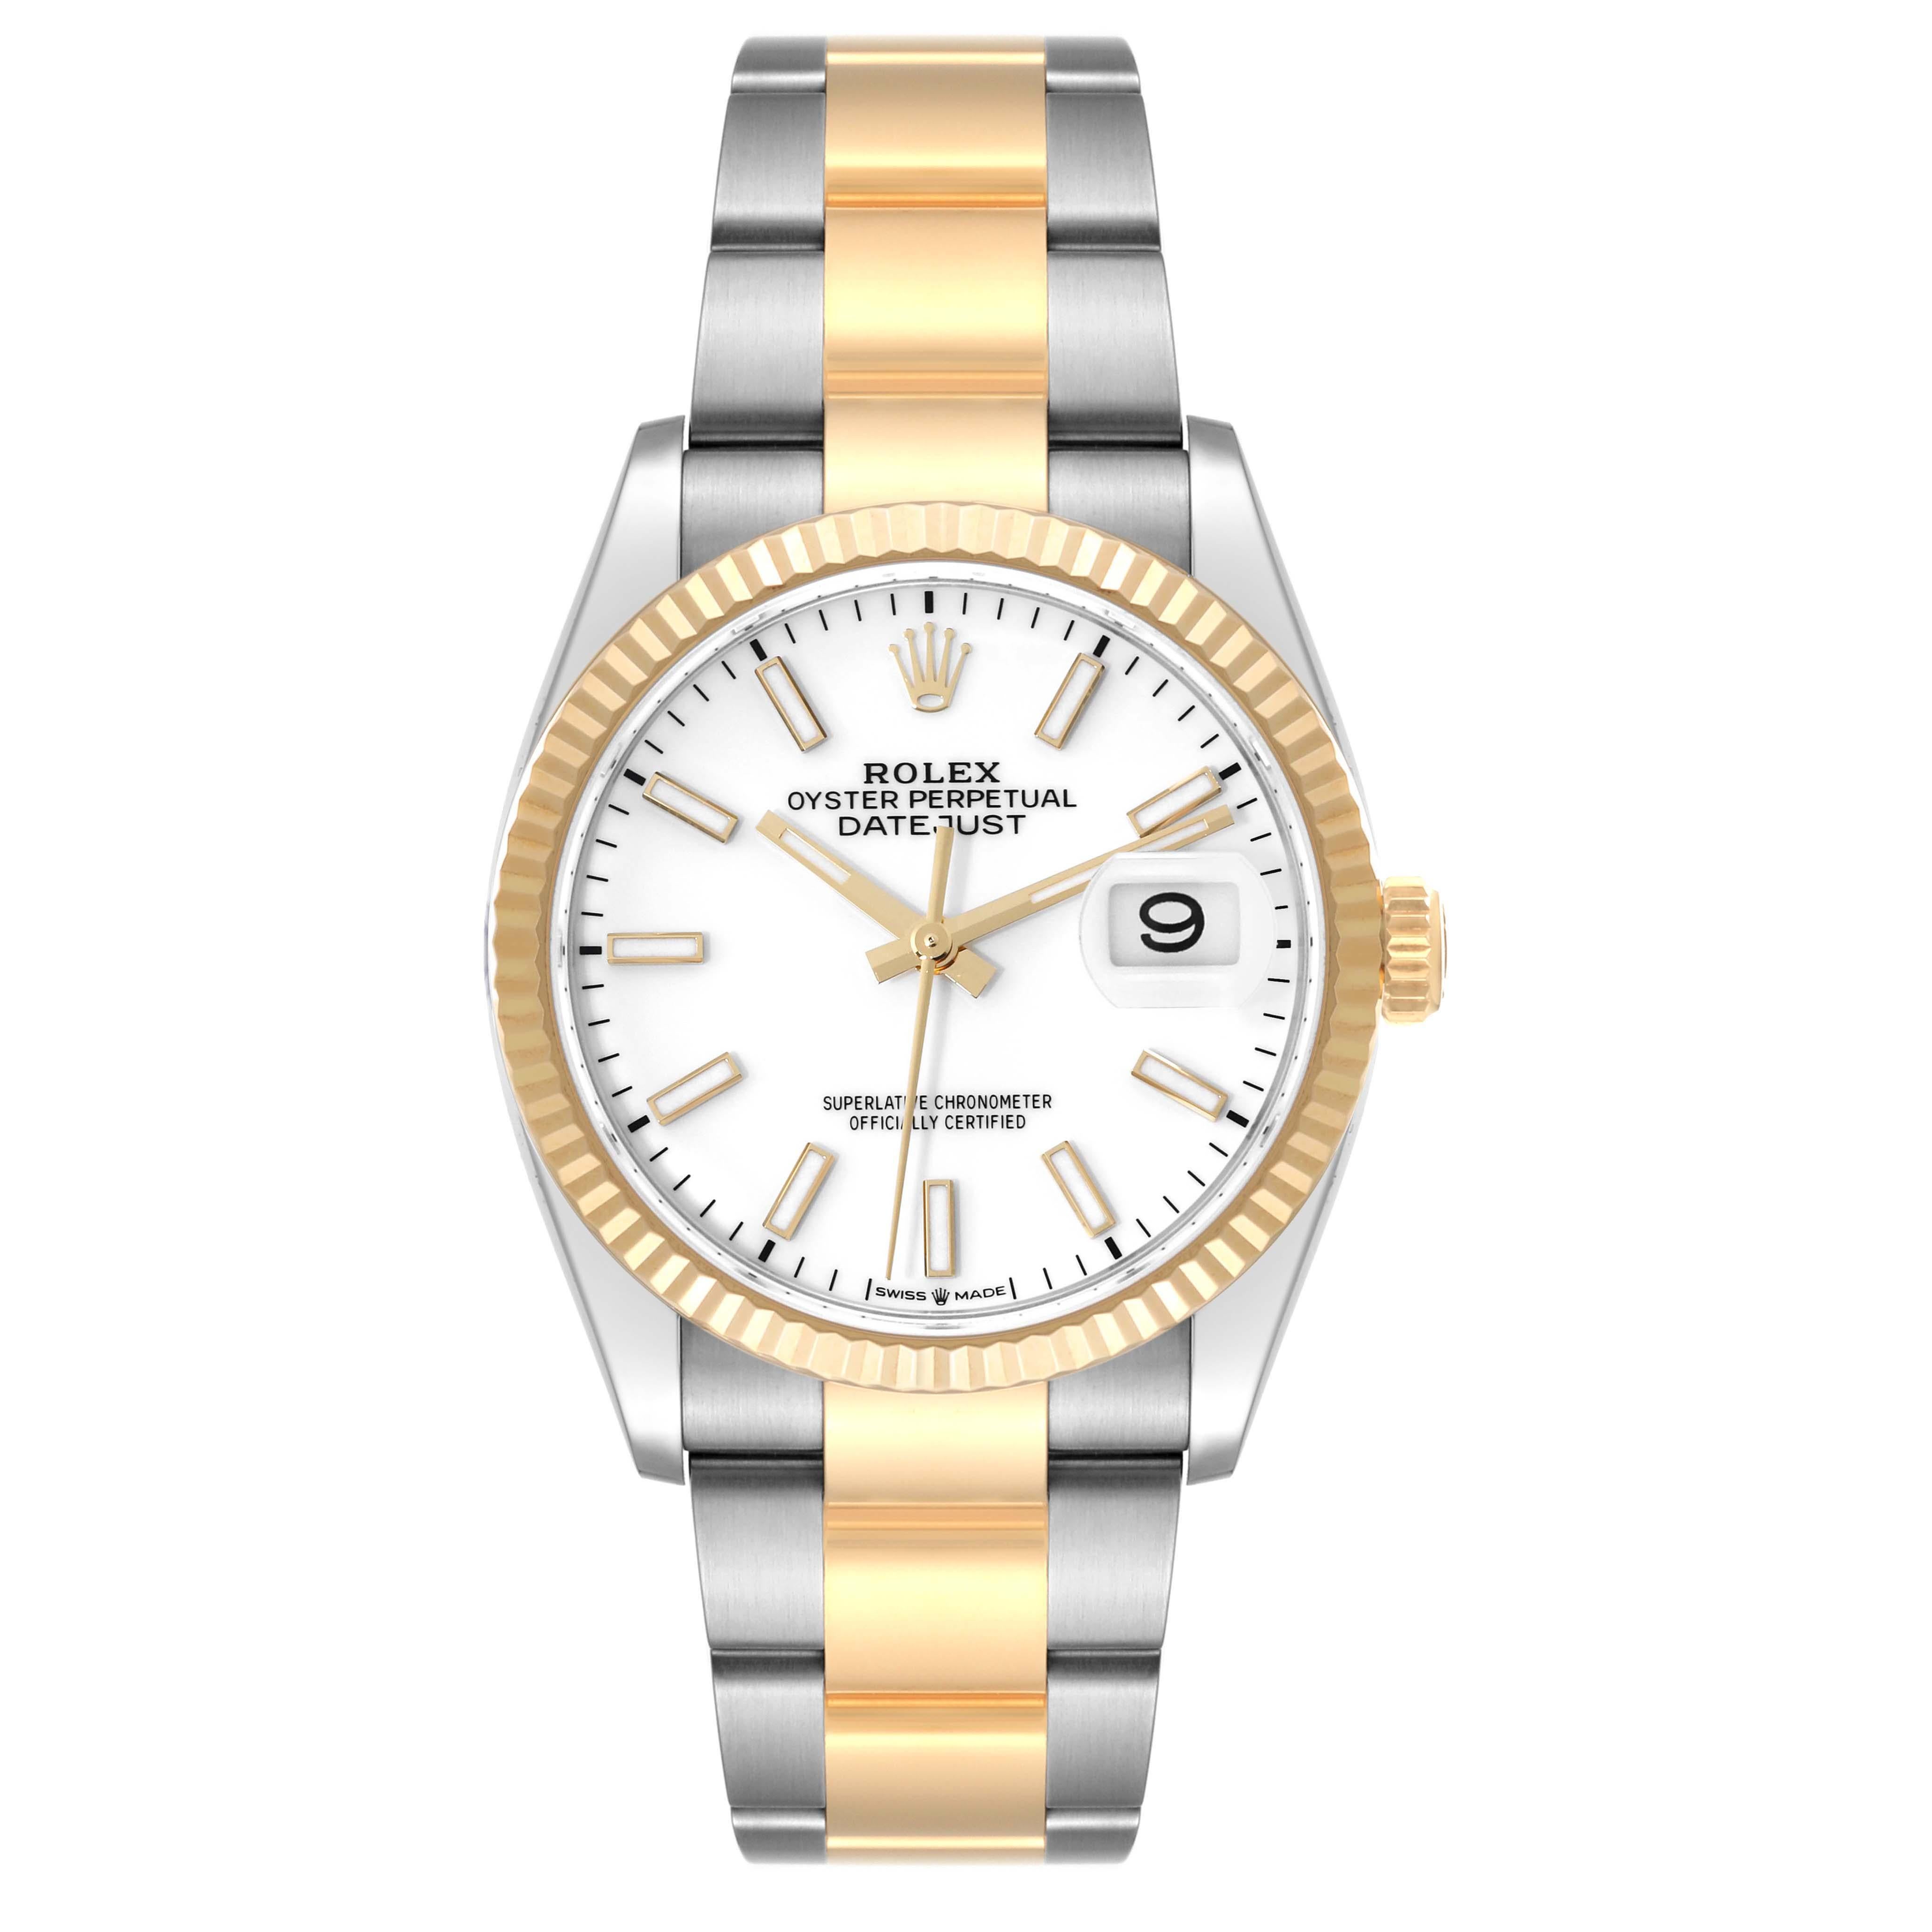 Rolex Datejust Steel Yellow Gold White Dial Mens Watch 126233 Box Card. Officially certified chronometer self-winding movement. Stainless steel and 18K yellow gold case 36.0 mm in diameter.  Rolex logo on a crown. 18K yellow gold fluted bezel.